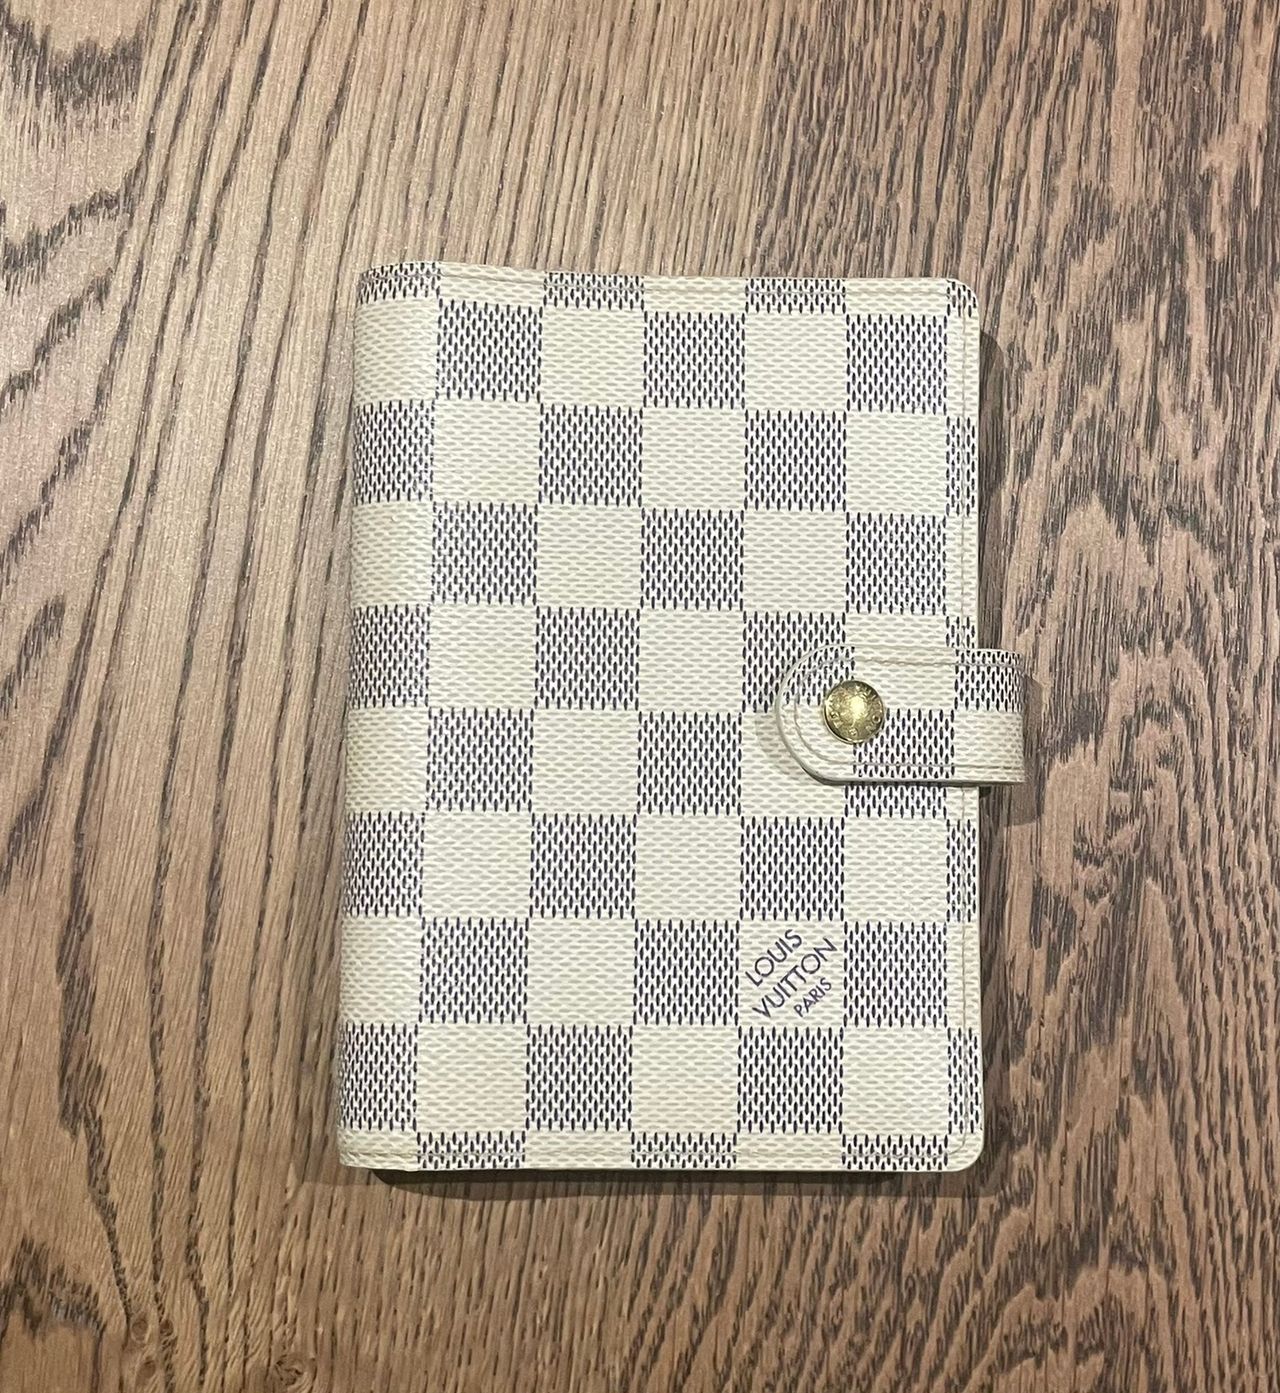 Finally completed my agenda collection! Each one has its own purpose 🥰 : r/ Louisvuitton